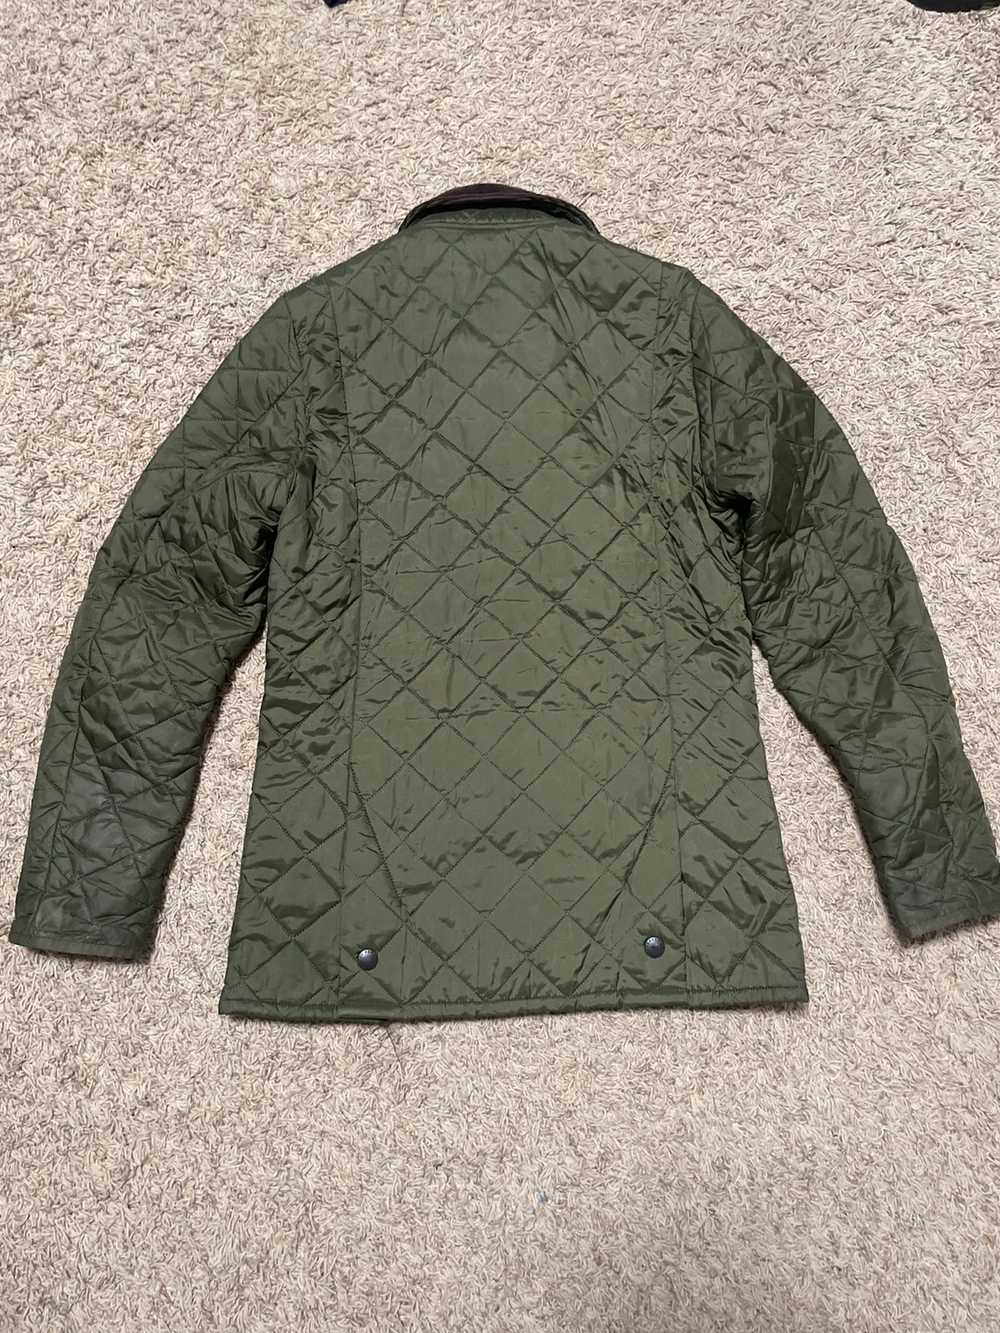 Barbour Womens Barn jacket - image 3